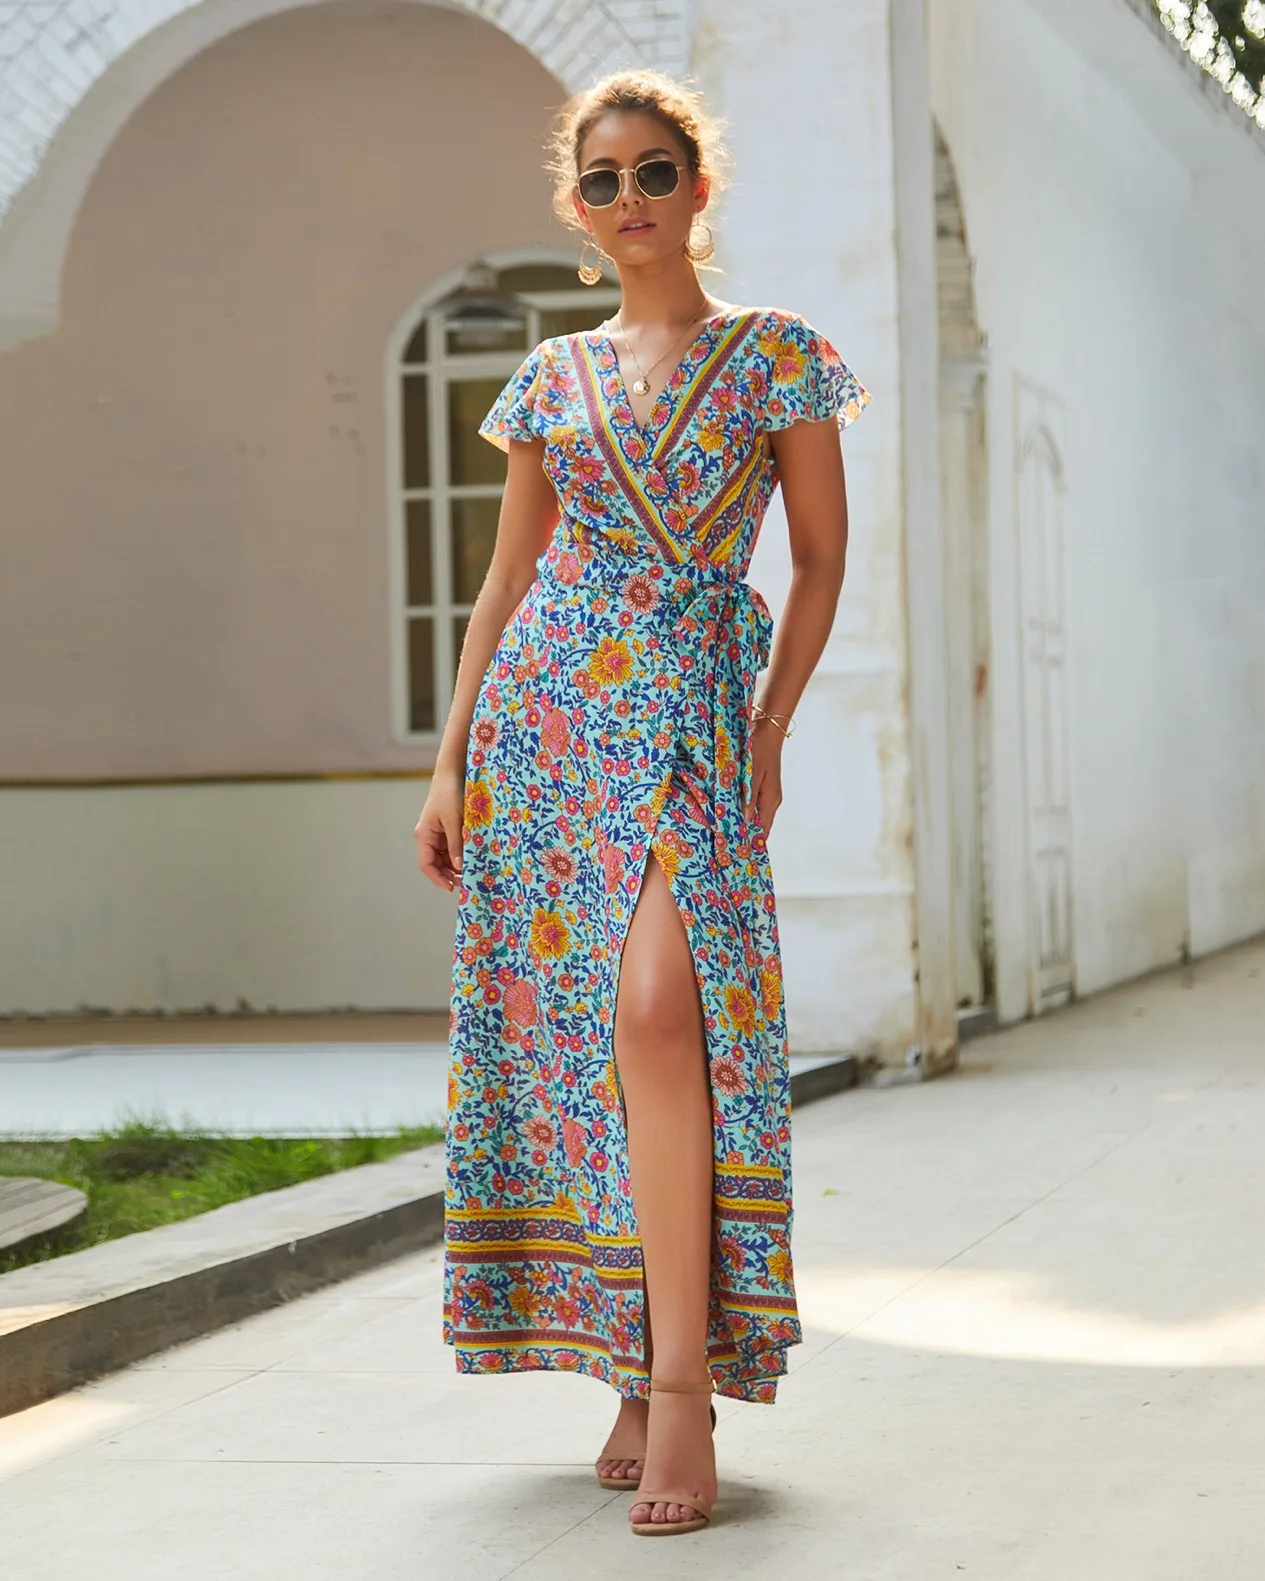 Colorful Wear Beach Women Sexy Dresses Vestidos Mujer Ladies Floral ...